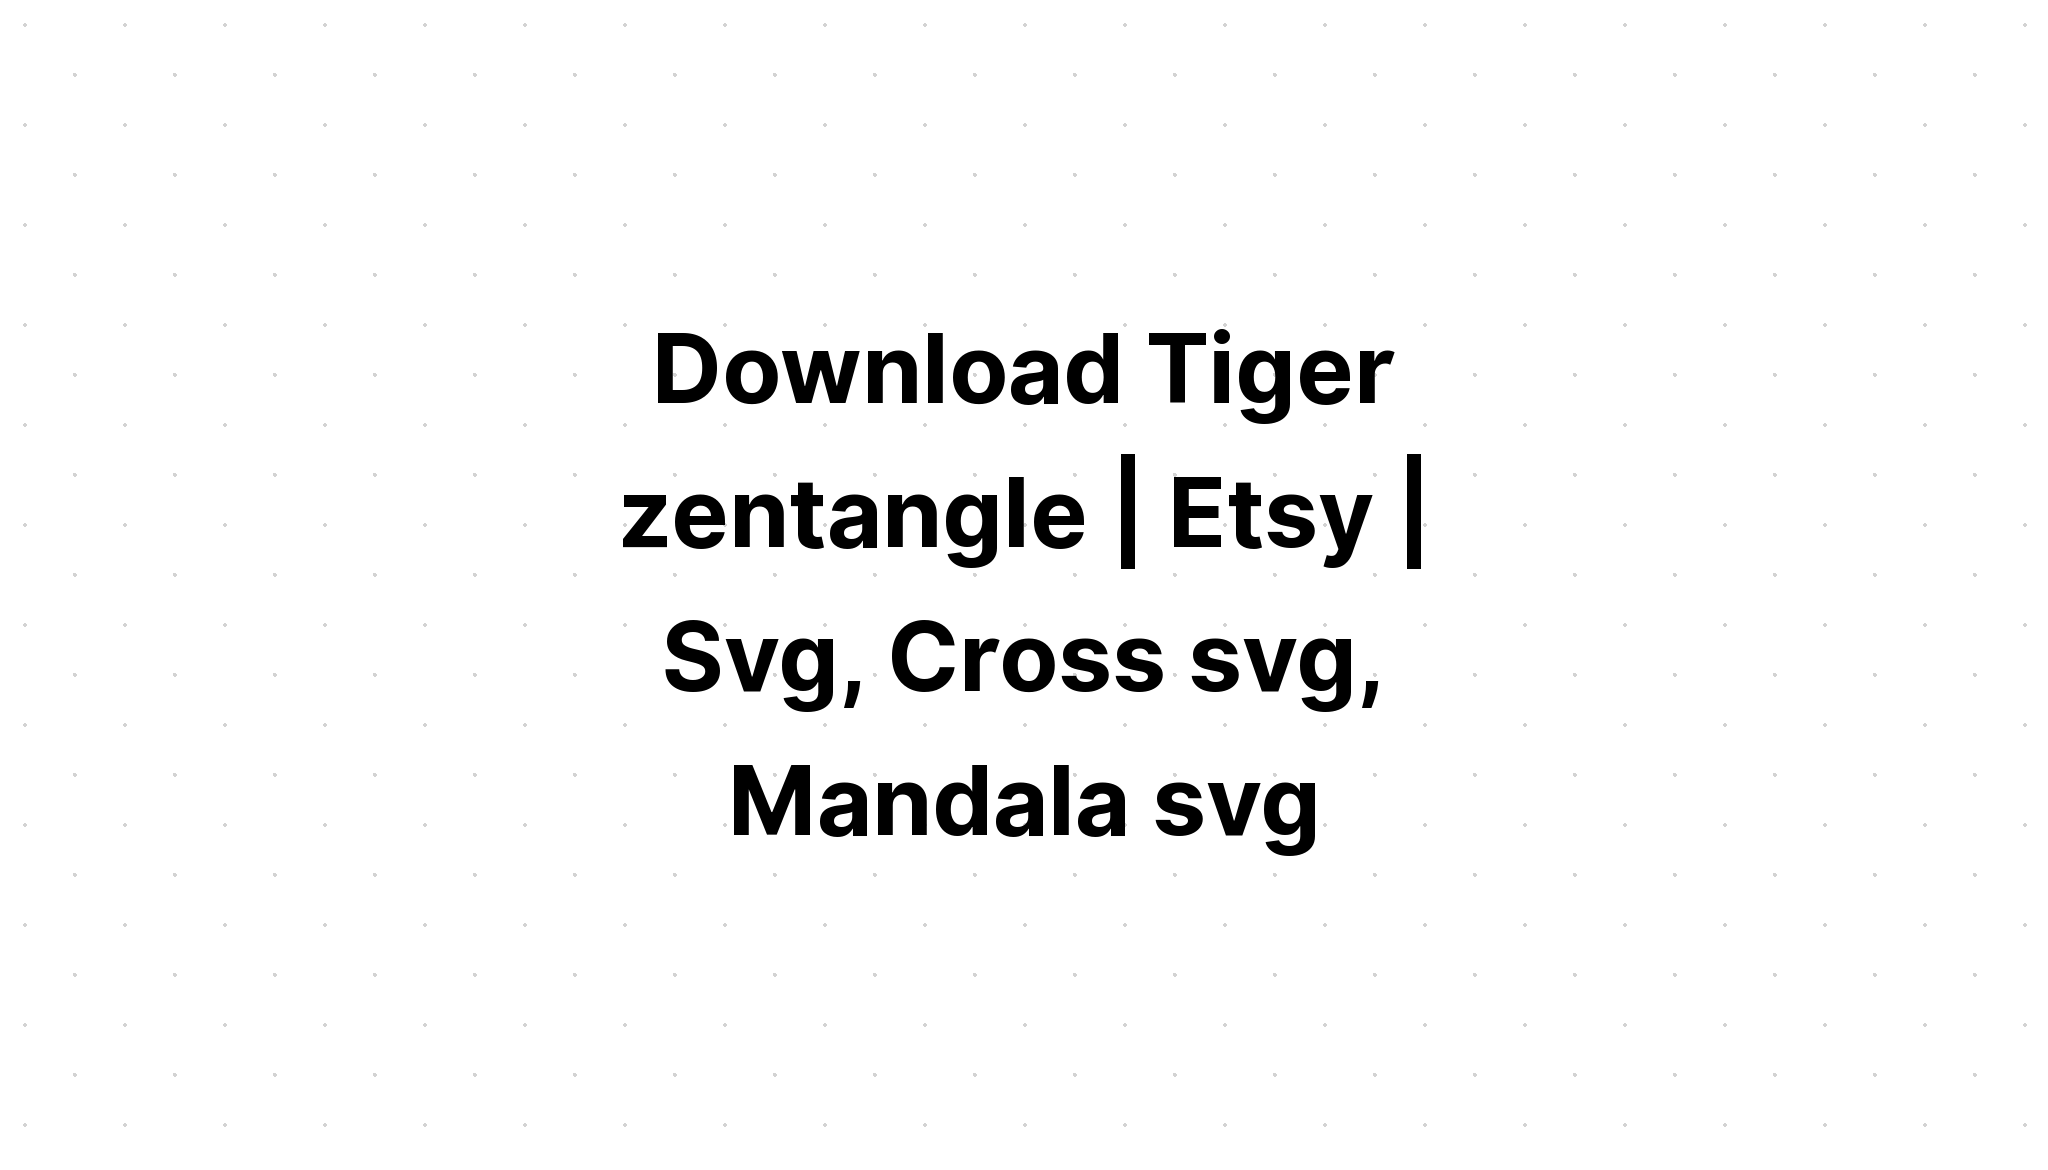 Download Layered Mandala Tiger Svg For Silhouette - Free SVG Cut File